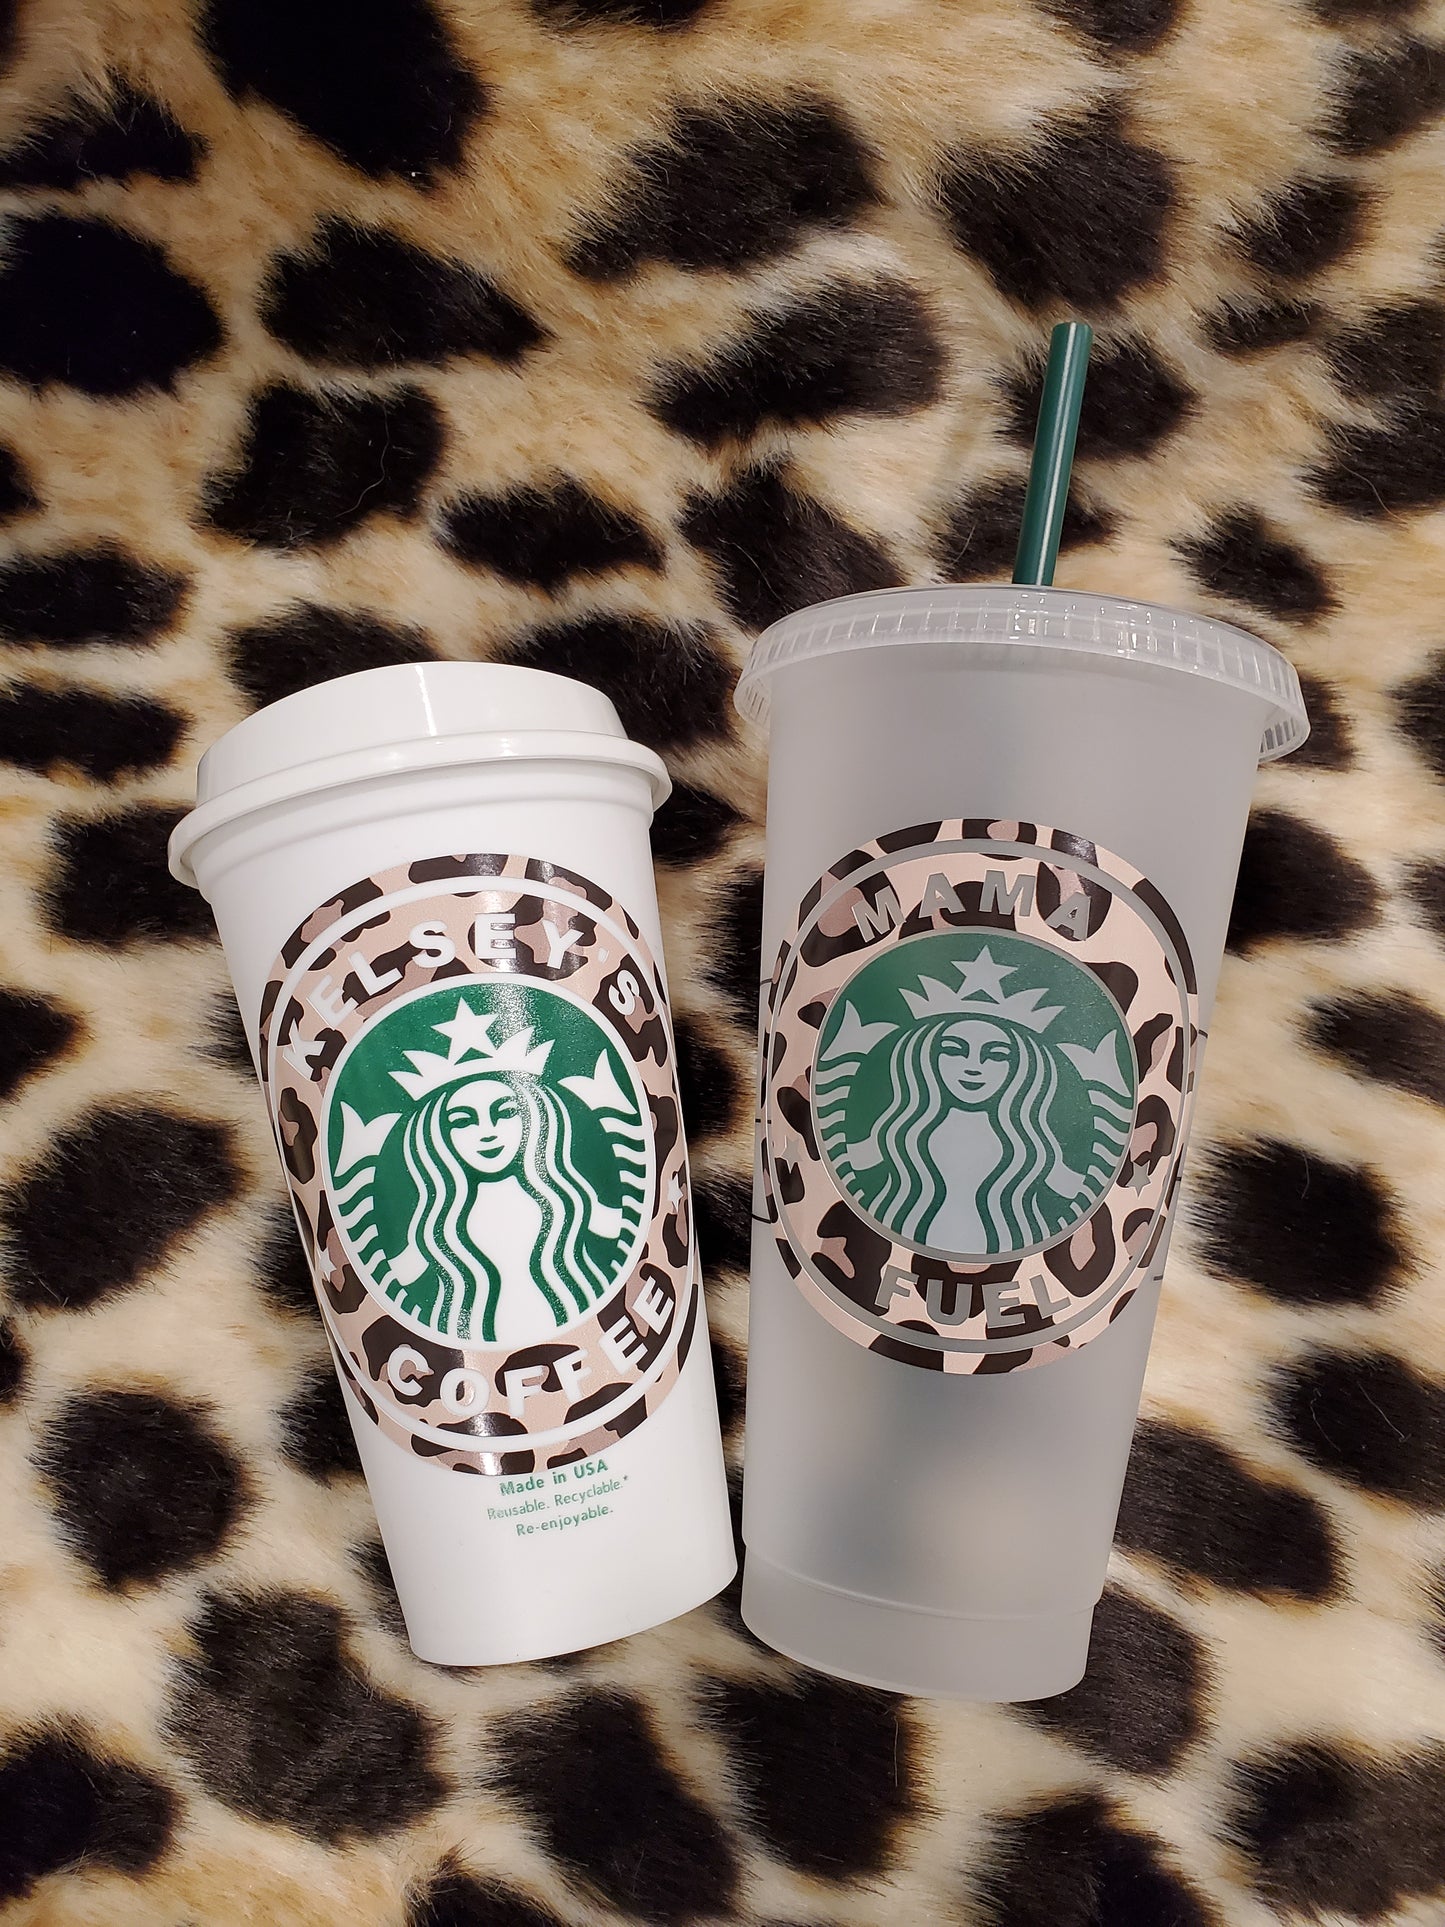 Personalized 16 oz Starbucks Reusable Cup with Custom Vinyl Decal